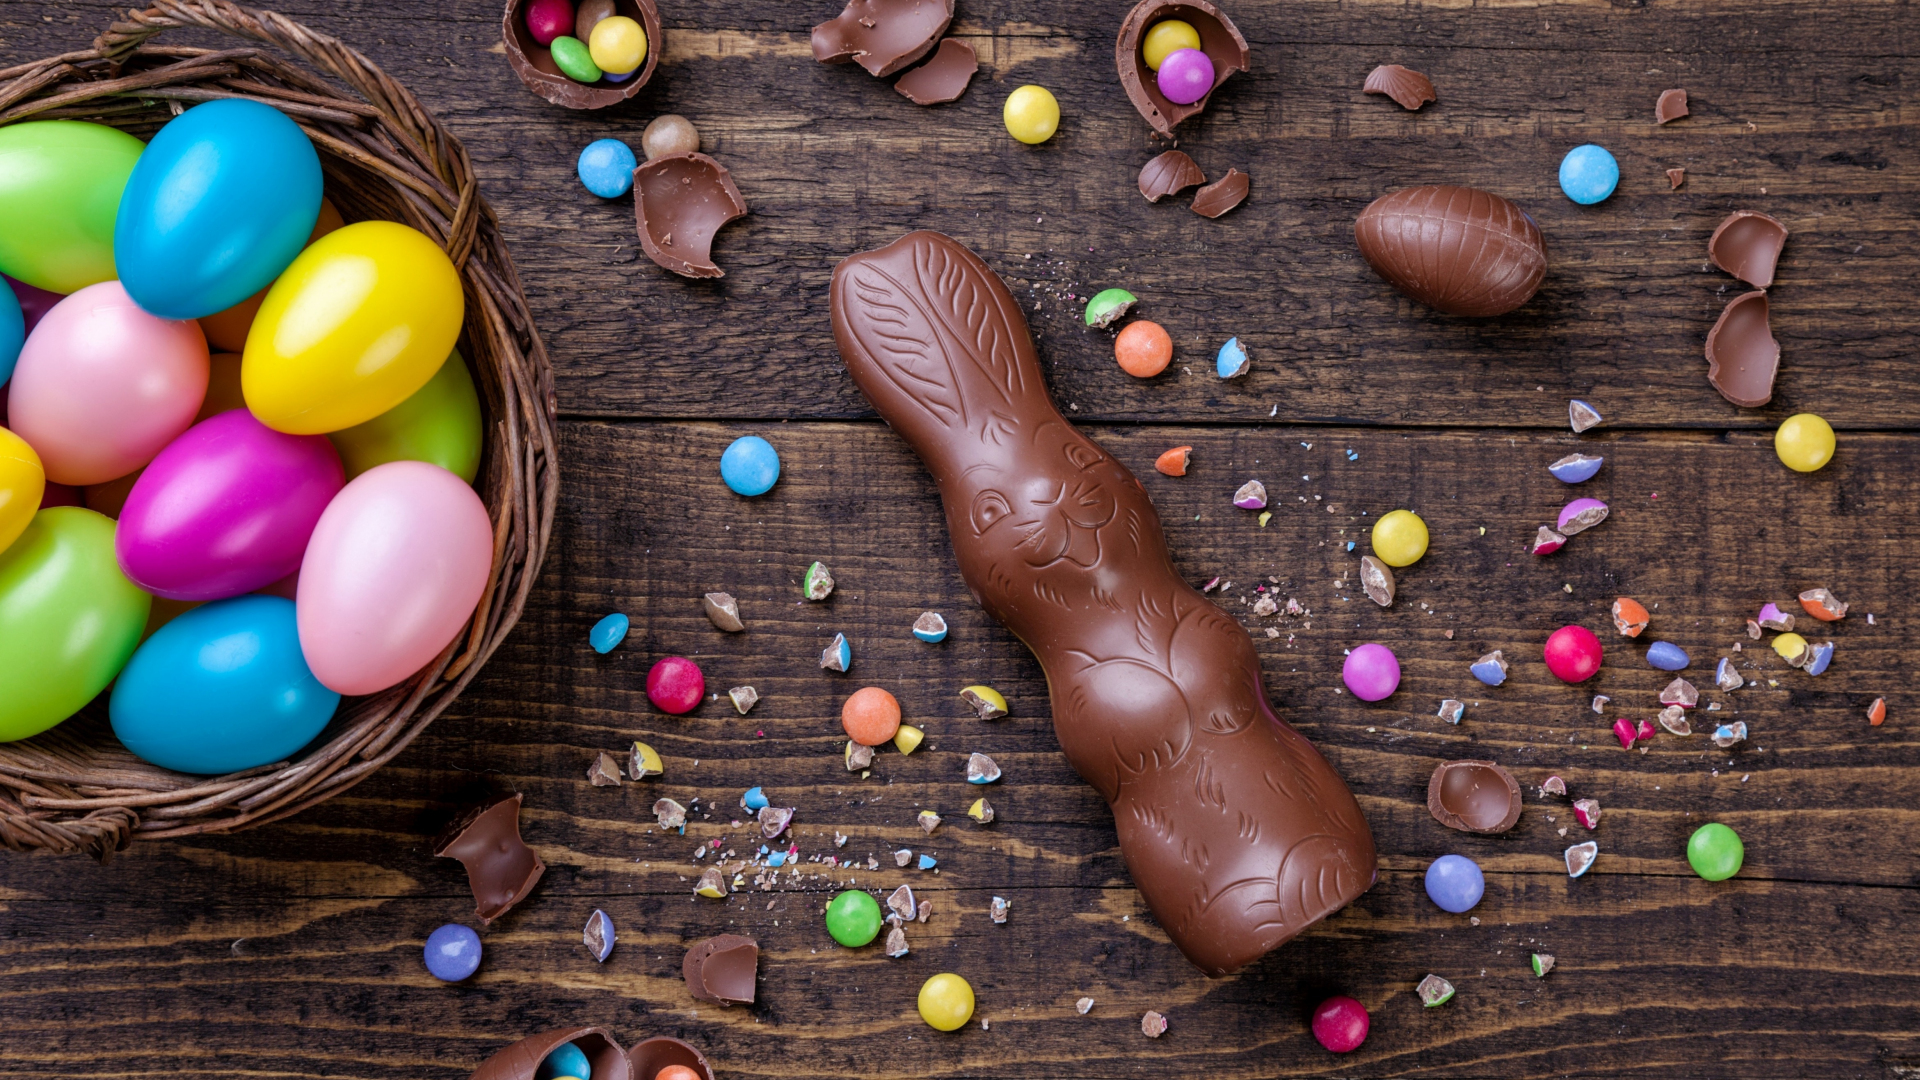 Download chocolate, bunny, easter, eggs 1920x1080 wallpaper, full hd, hdtv, fhd, 1080p wallpaper, 1920x1080 HD image, background, 3743